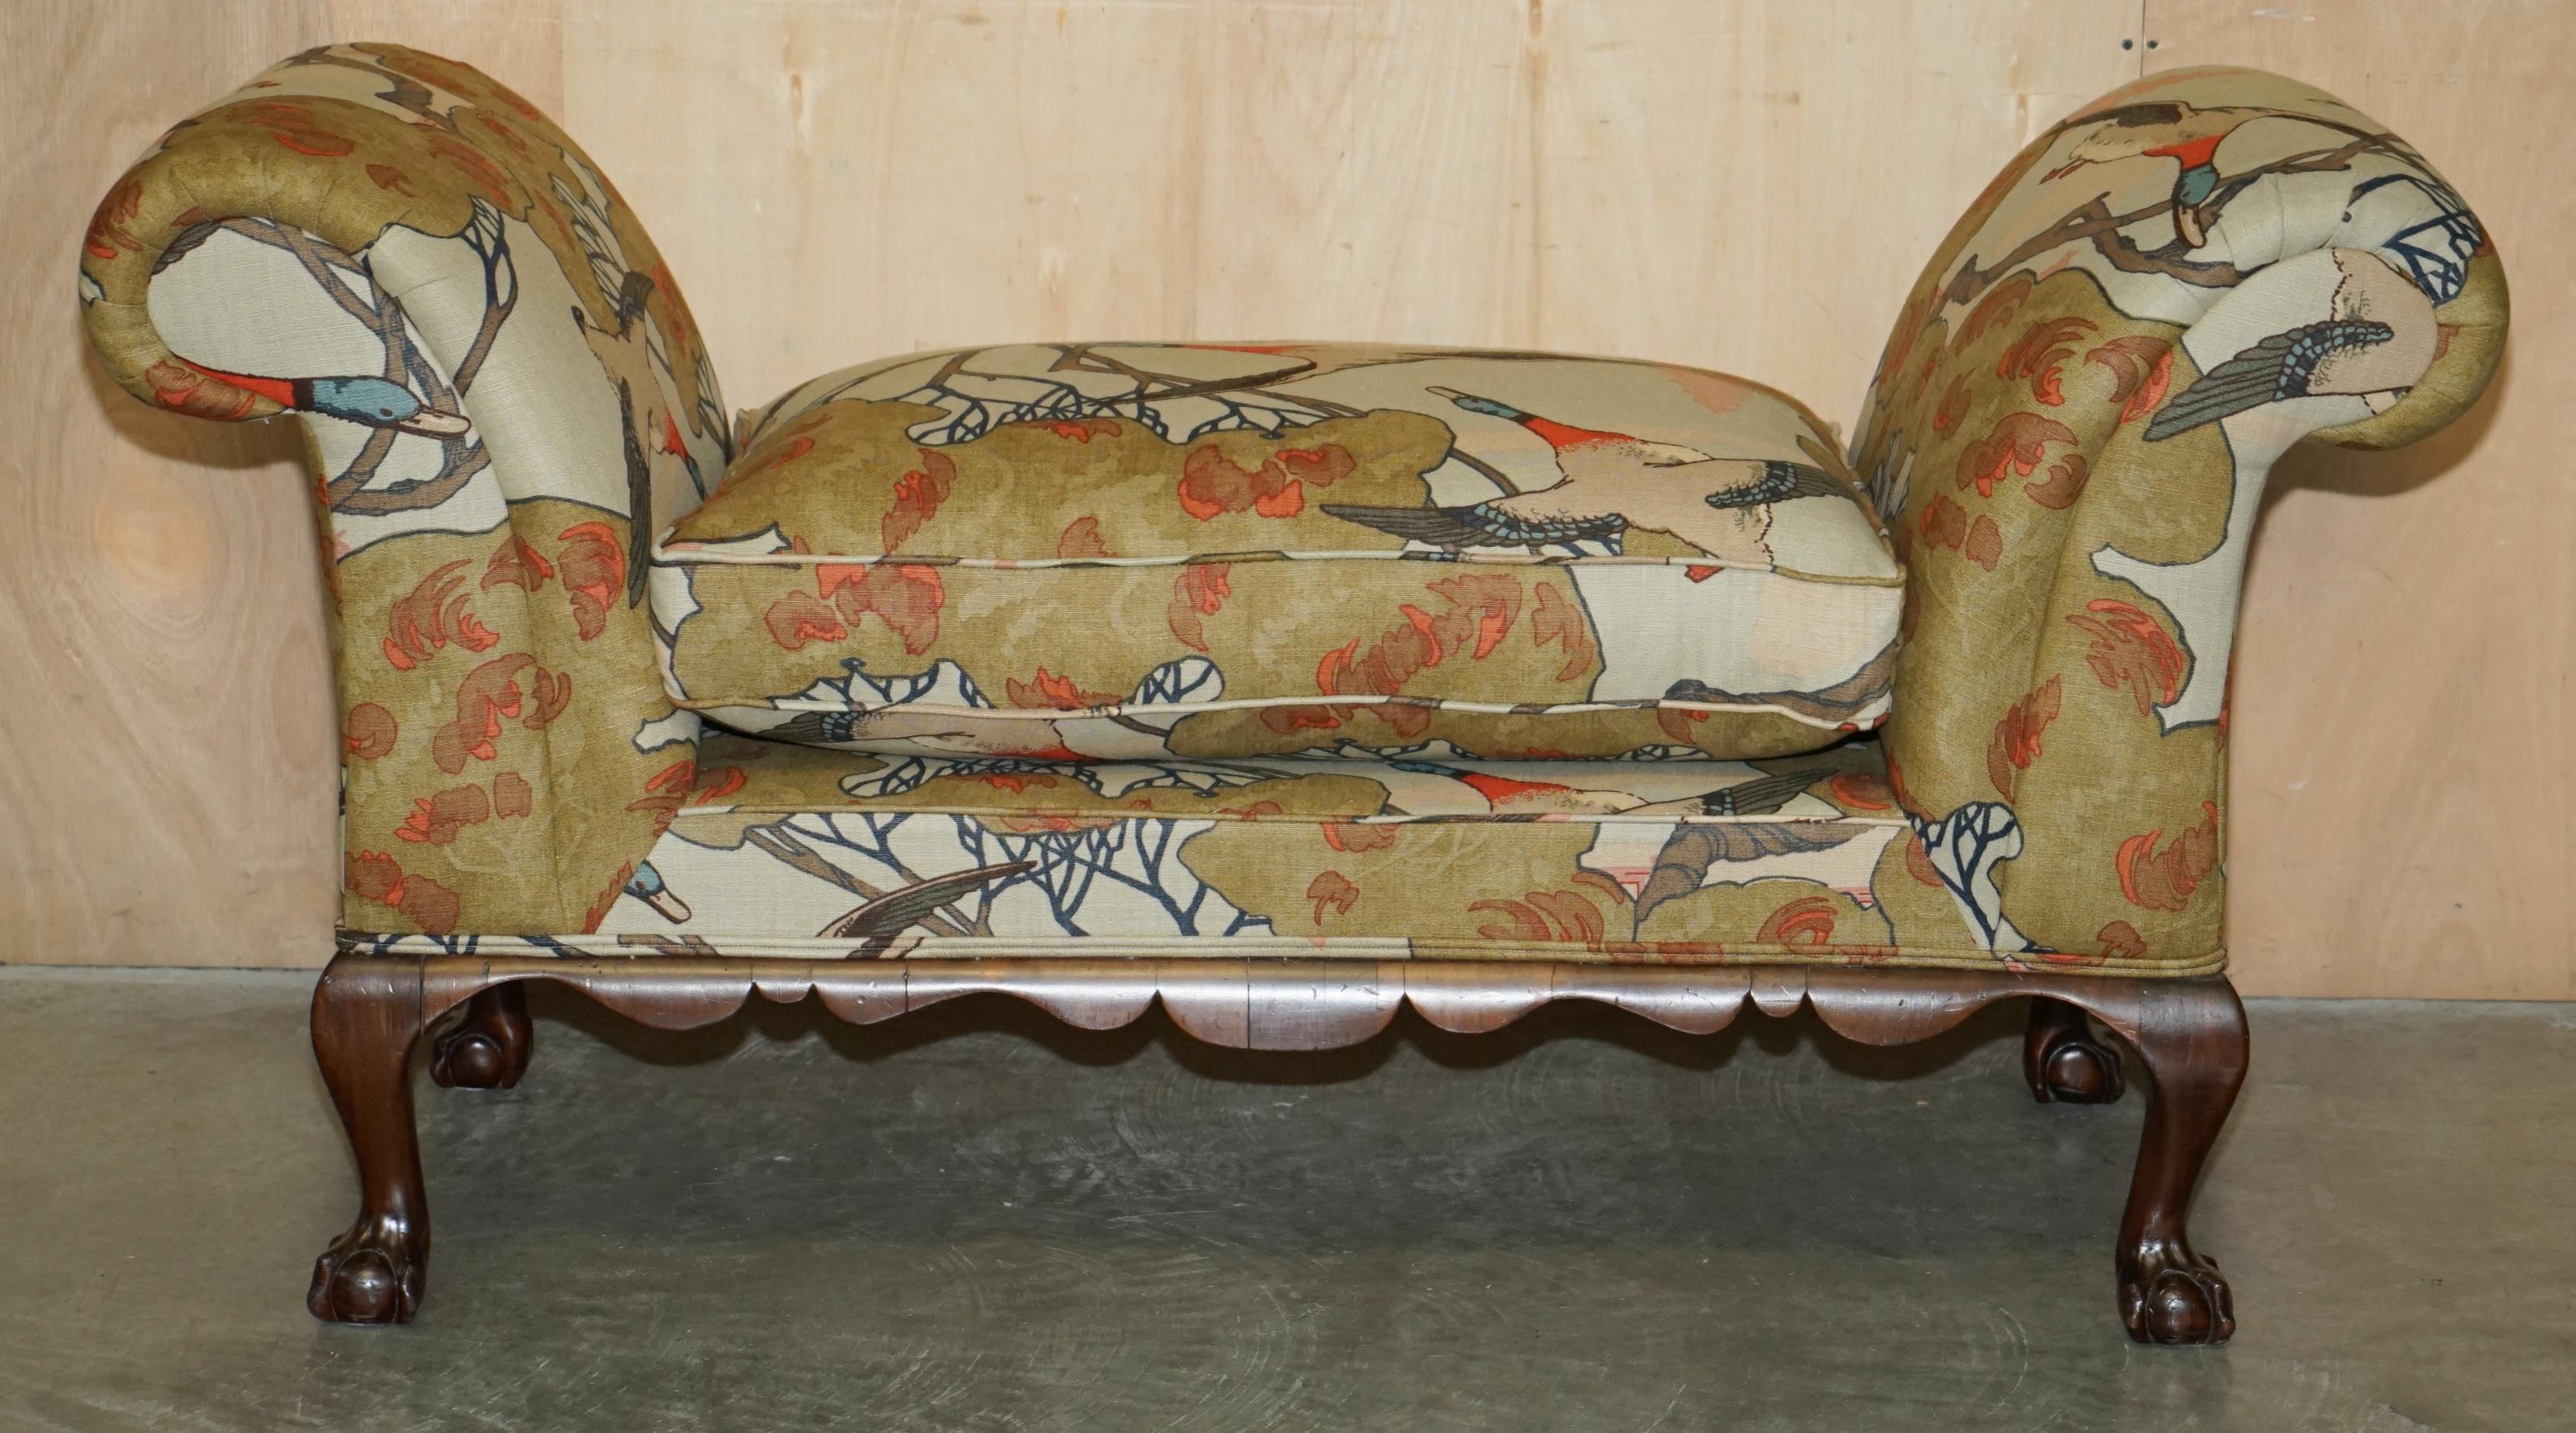 ANTIQUE CLAW & BALL FOOT HALL BENCH WiNDOW SEAT IN MULBERRY FLYING DUCK S FABRIC im Angebot 13